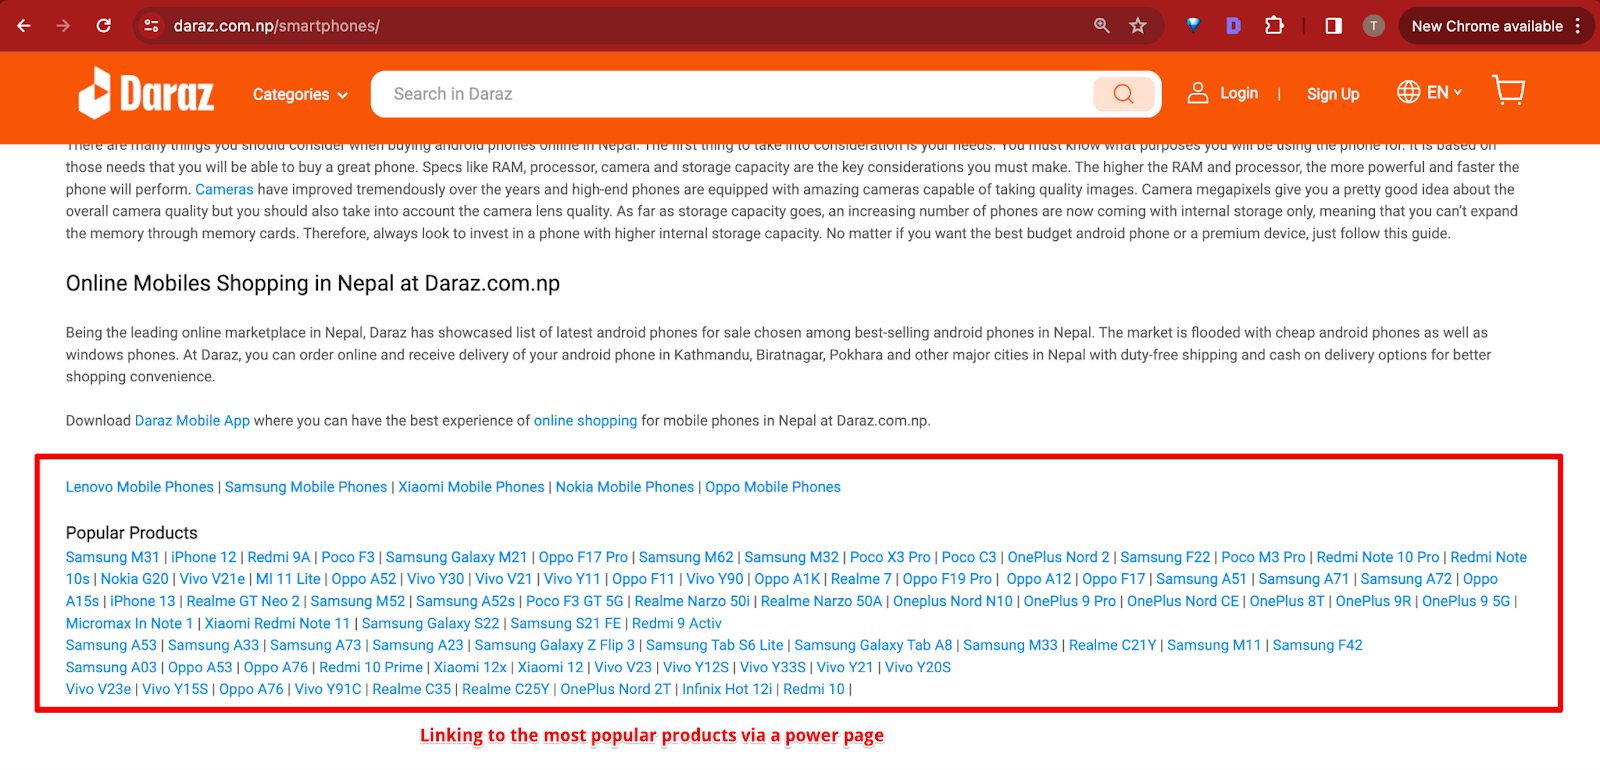 daraz internal linking to the most popular products through power pages